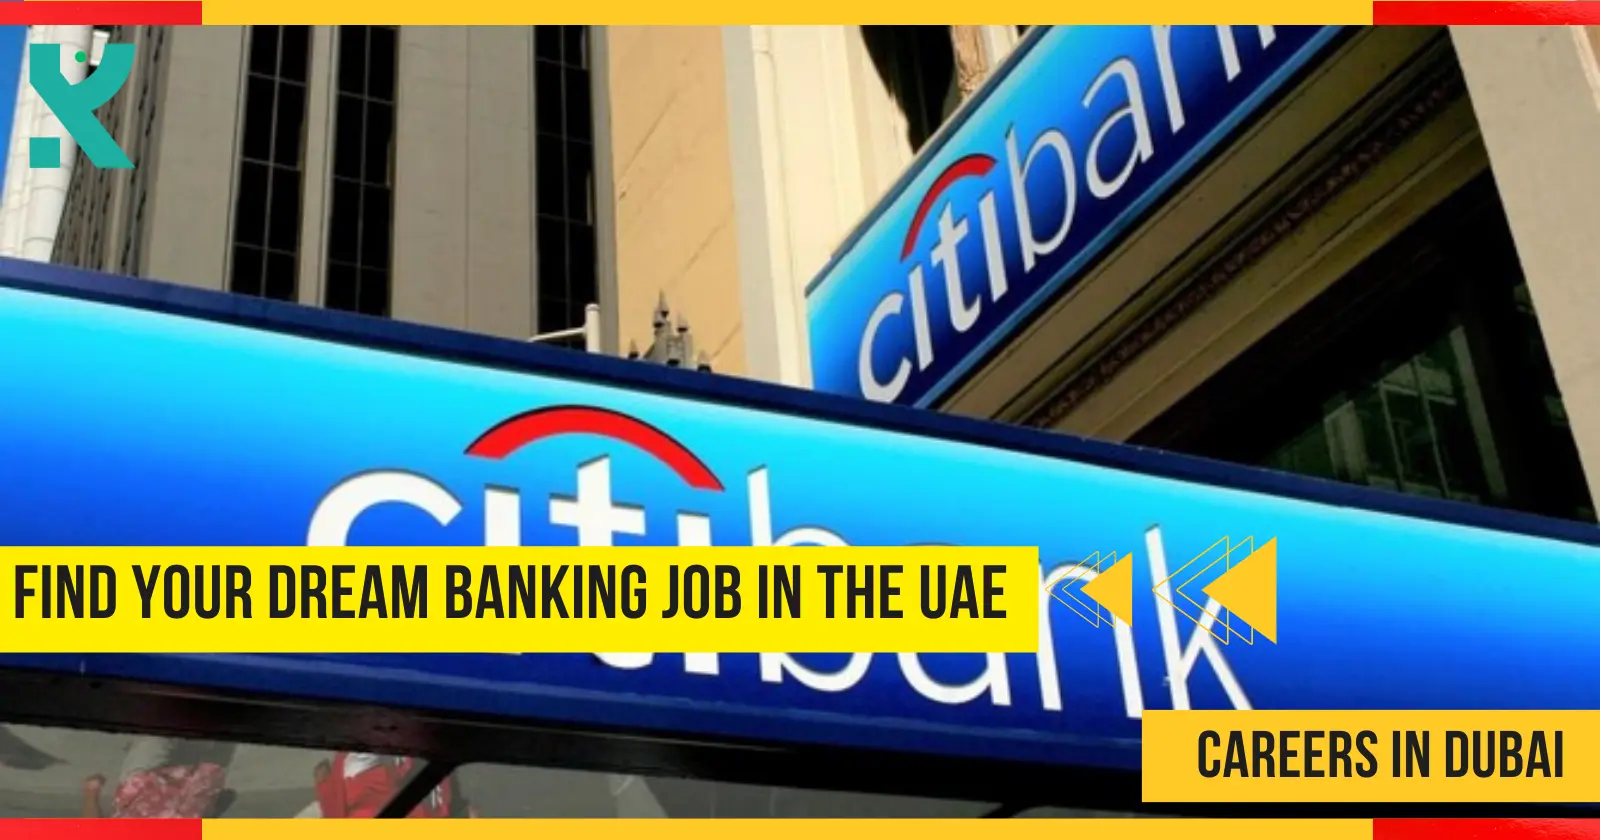 Find Your Dream Banking Job in the UAE